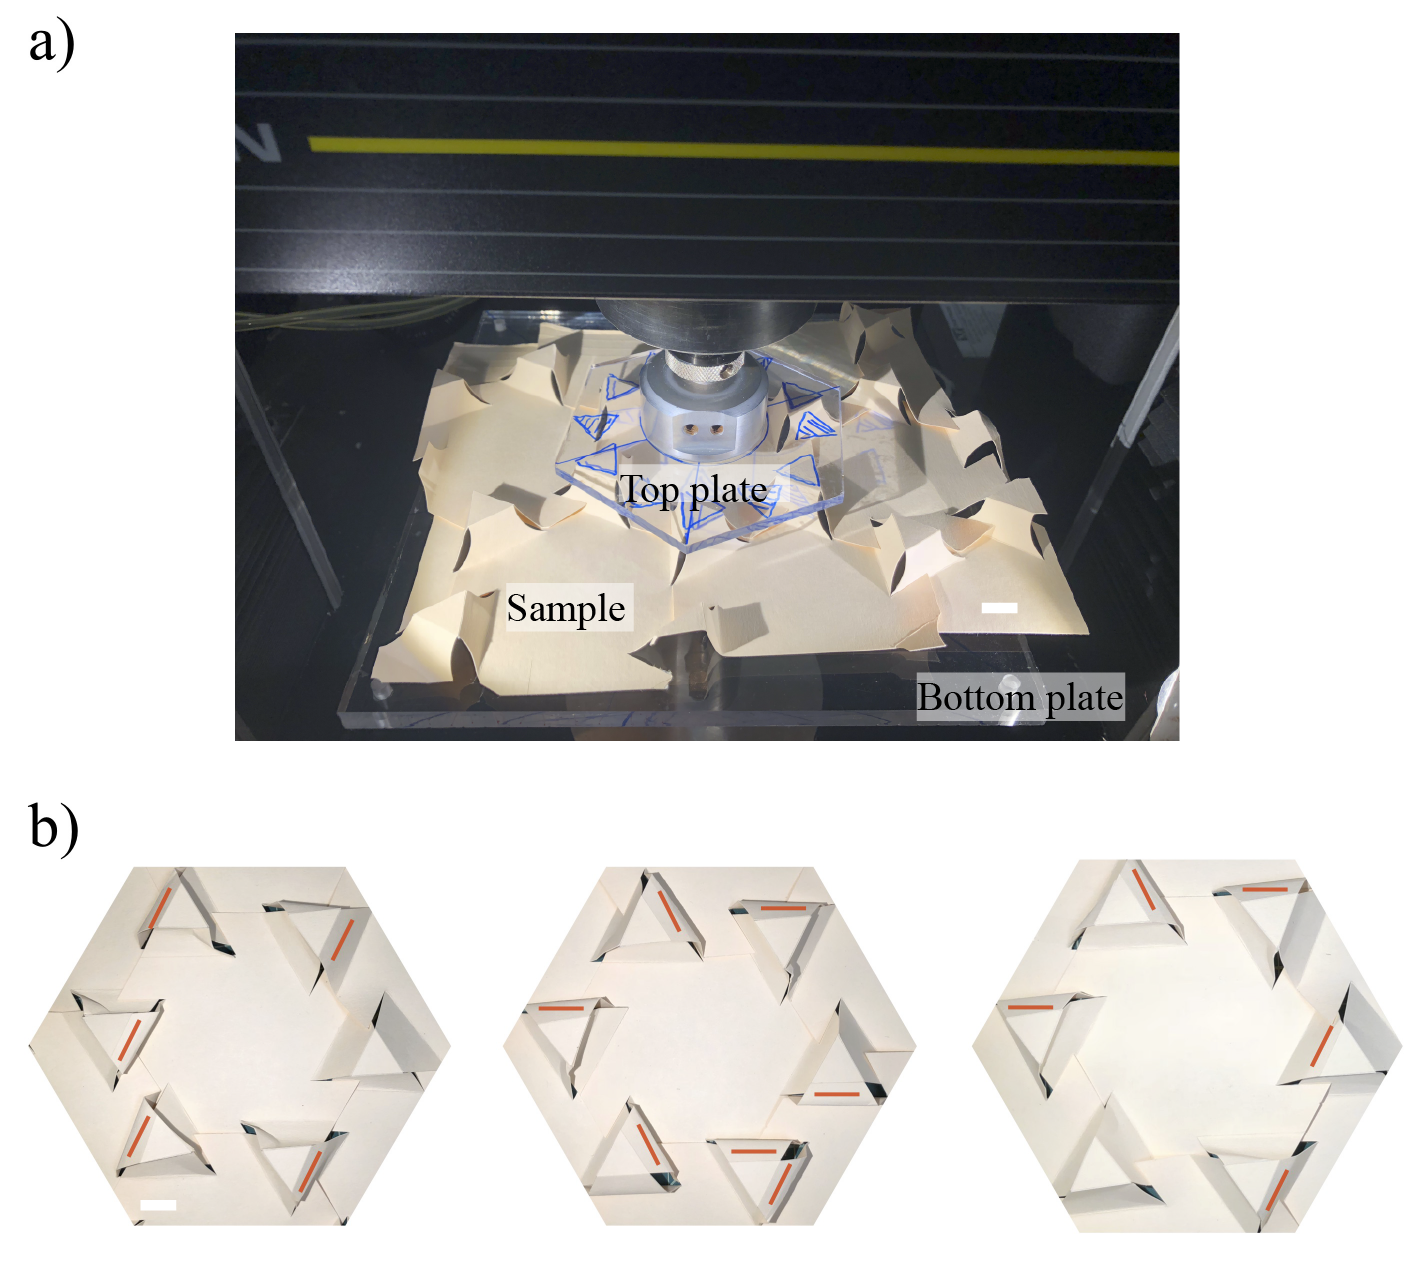 top panel a shows a clear press listed as top plate pressing a manila paper labelled sample against a clear barrier called bottom plate, panel b below shows how the triangular patterns break under pressure